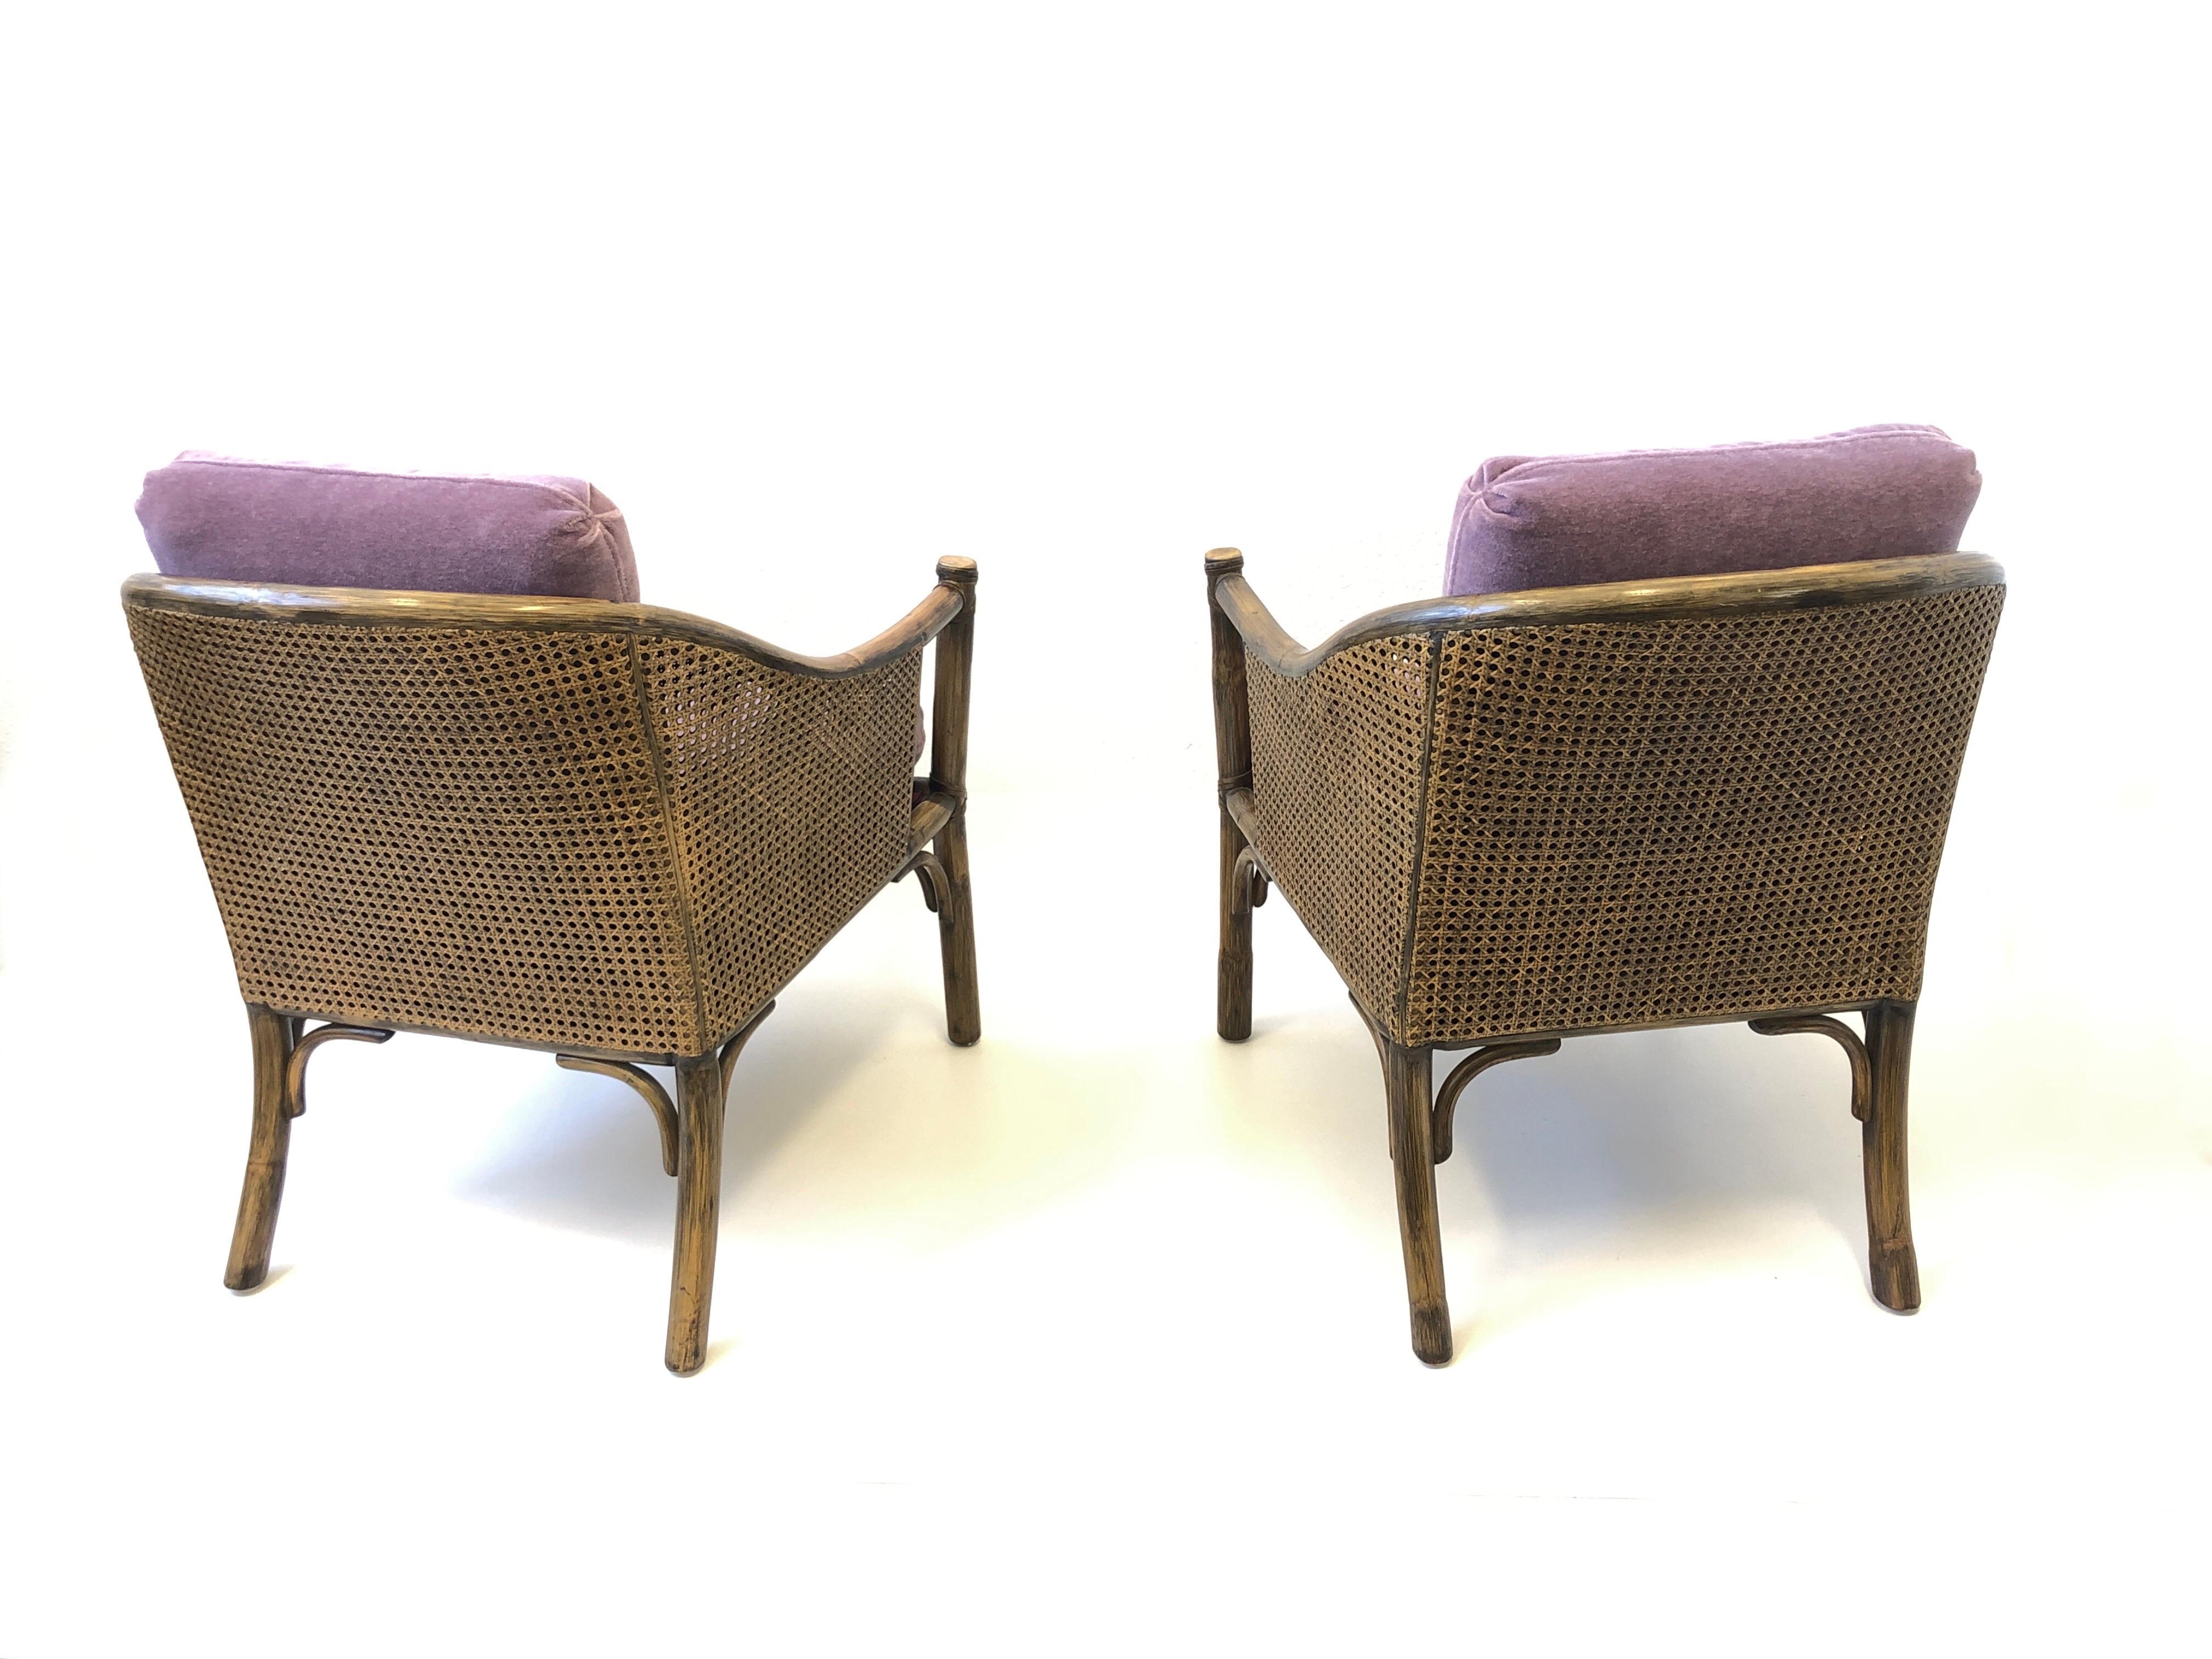 American Pair of Bamboo and Cane Lounge Chairs by McGuire